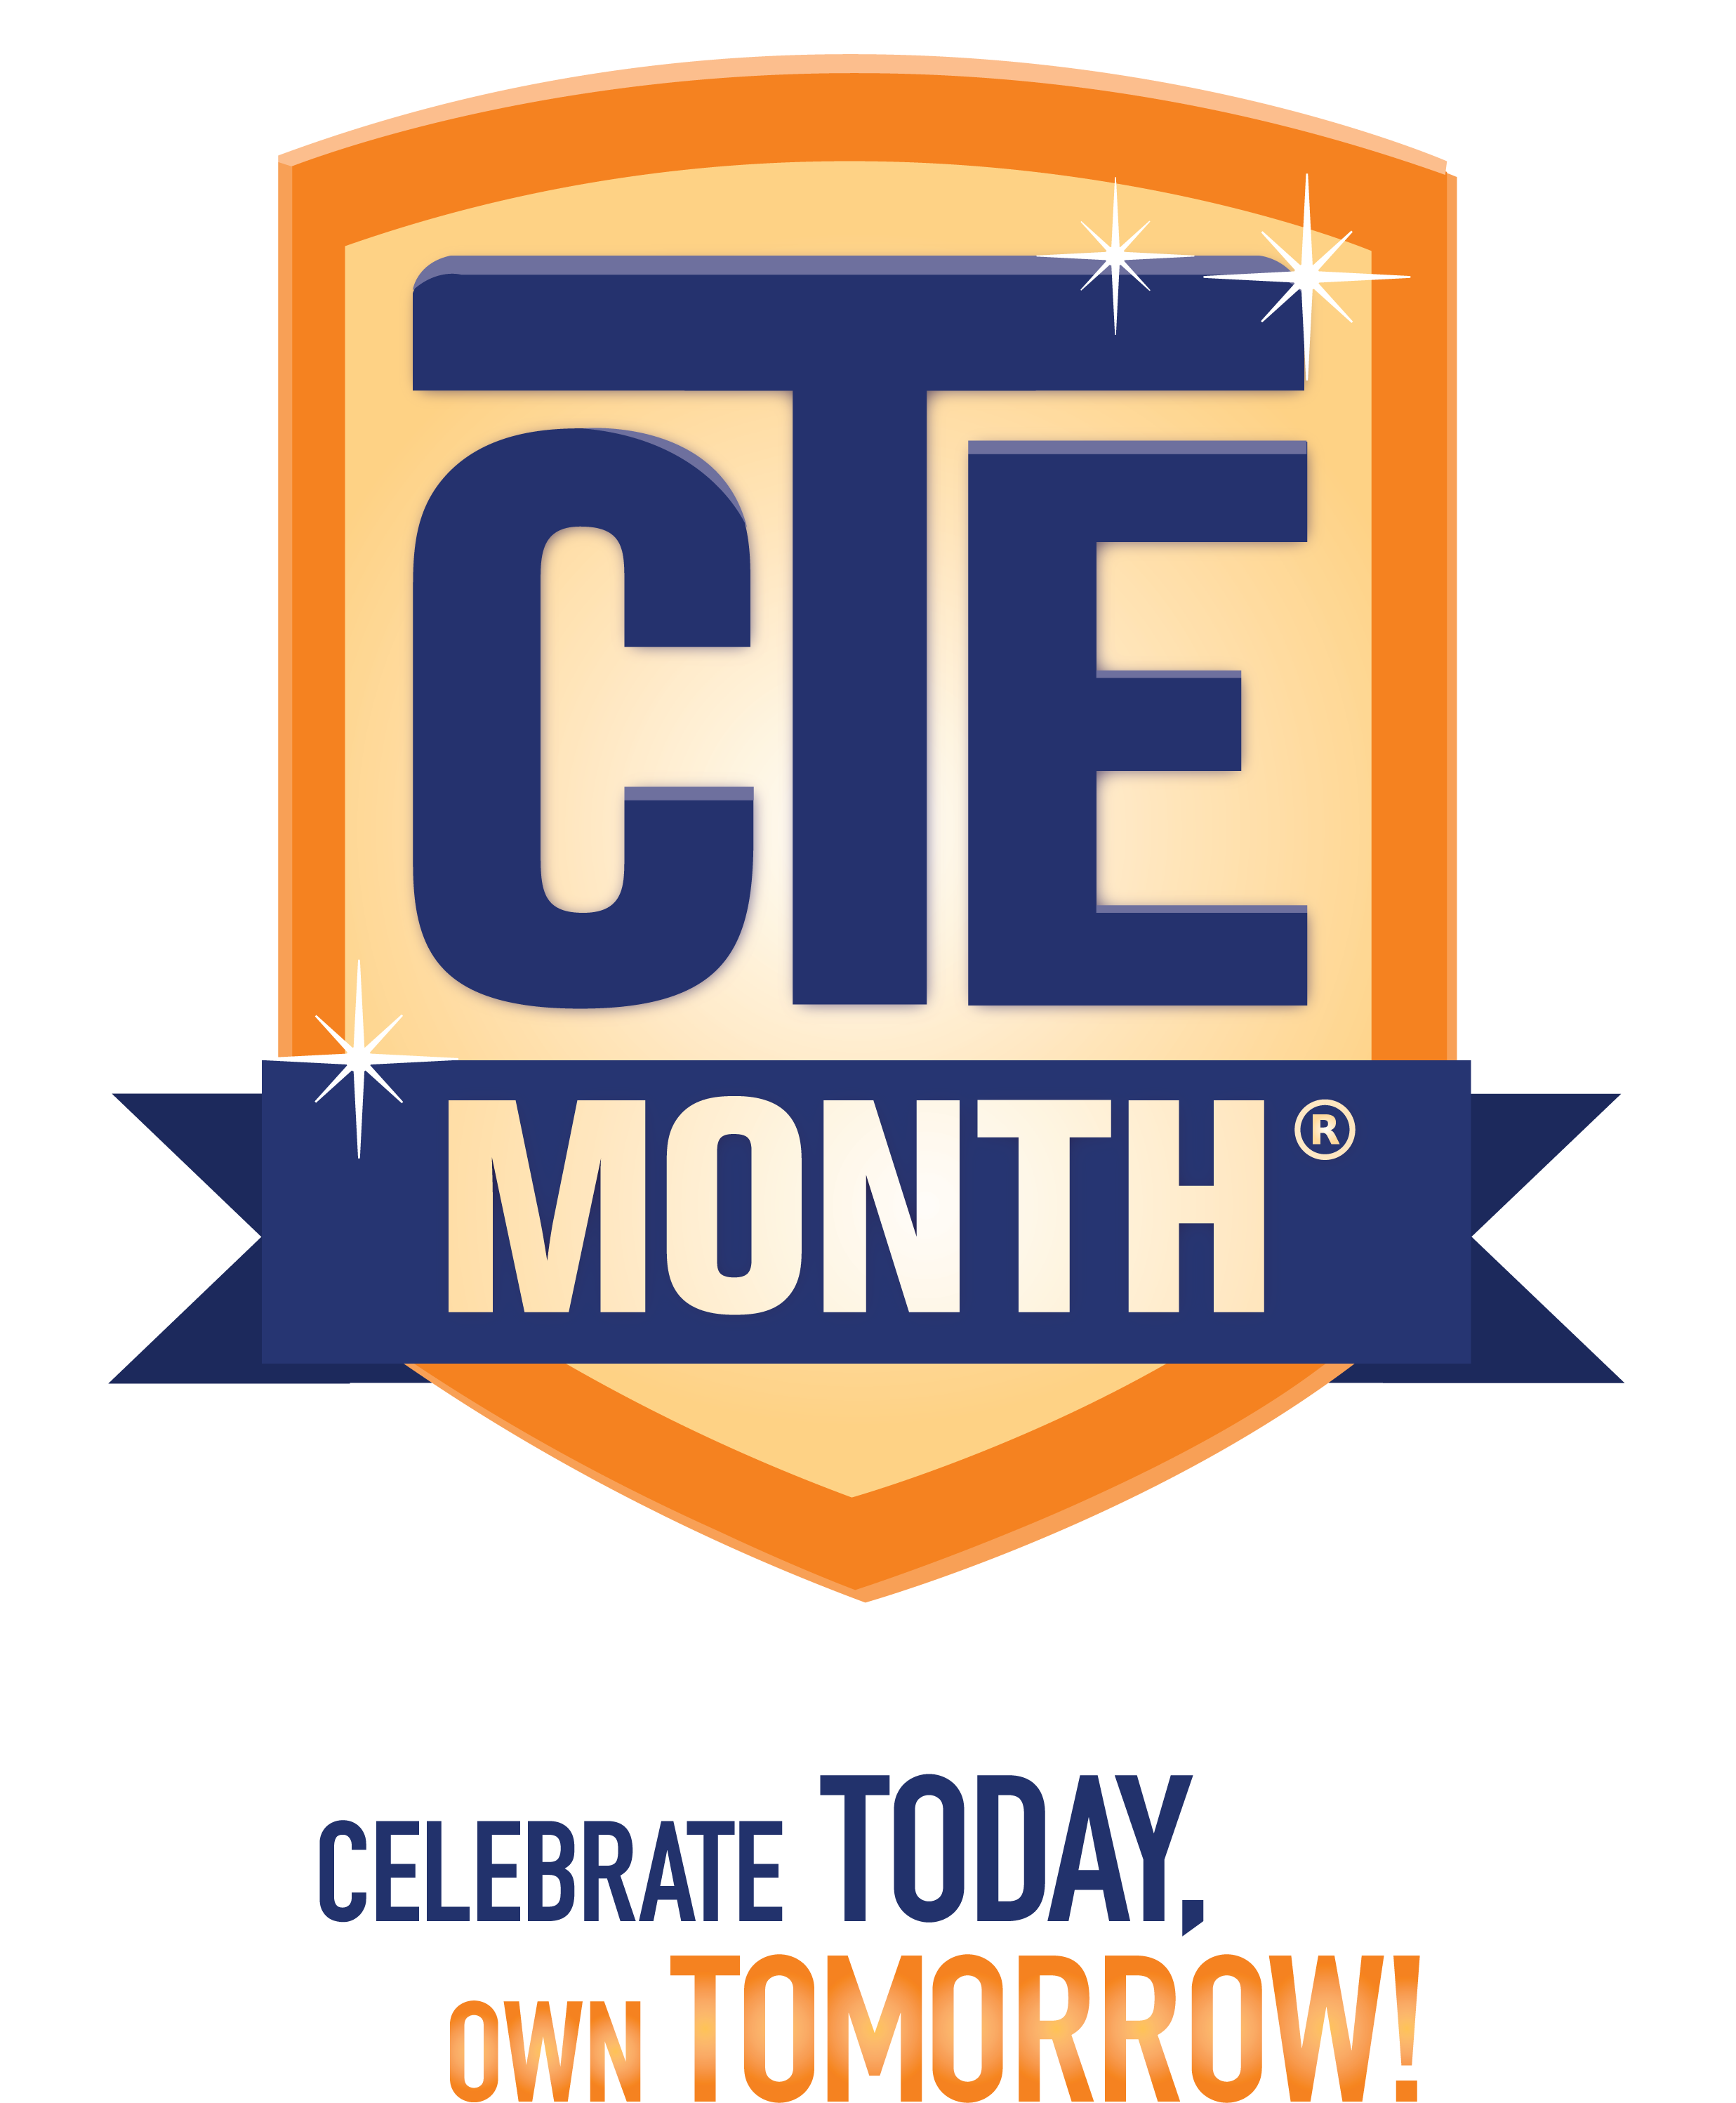 Celebrate Career And Technical Education Month In February - Cte Month 2017 (2550x3299)